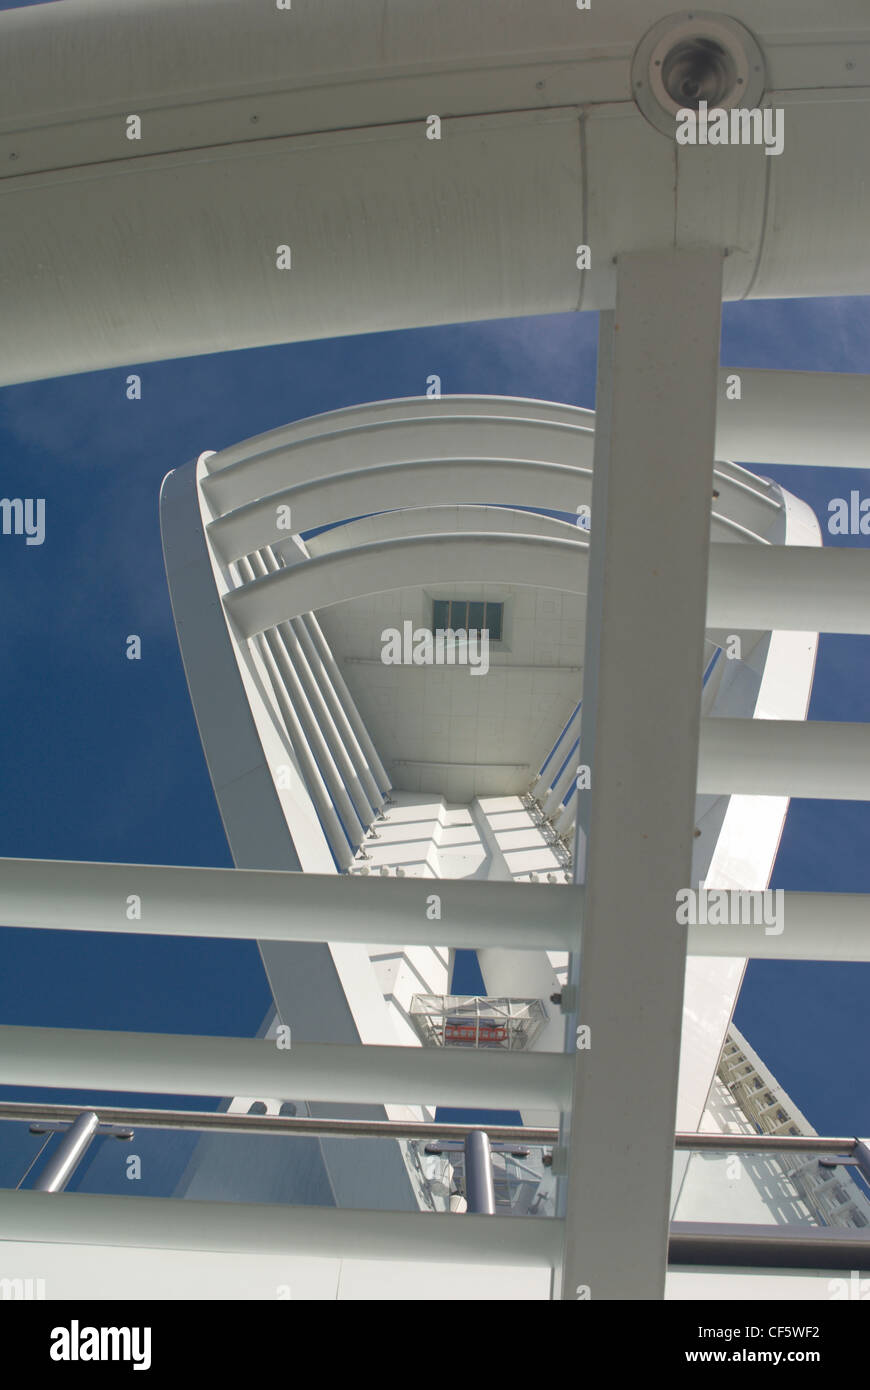 Looking up at the superstructure of the Spinnaker Tower. The glass floor upon which people can stand is visible. Stock Photo